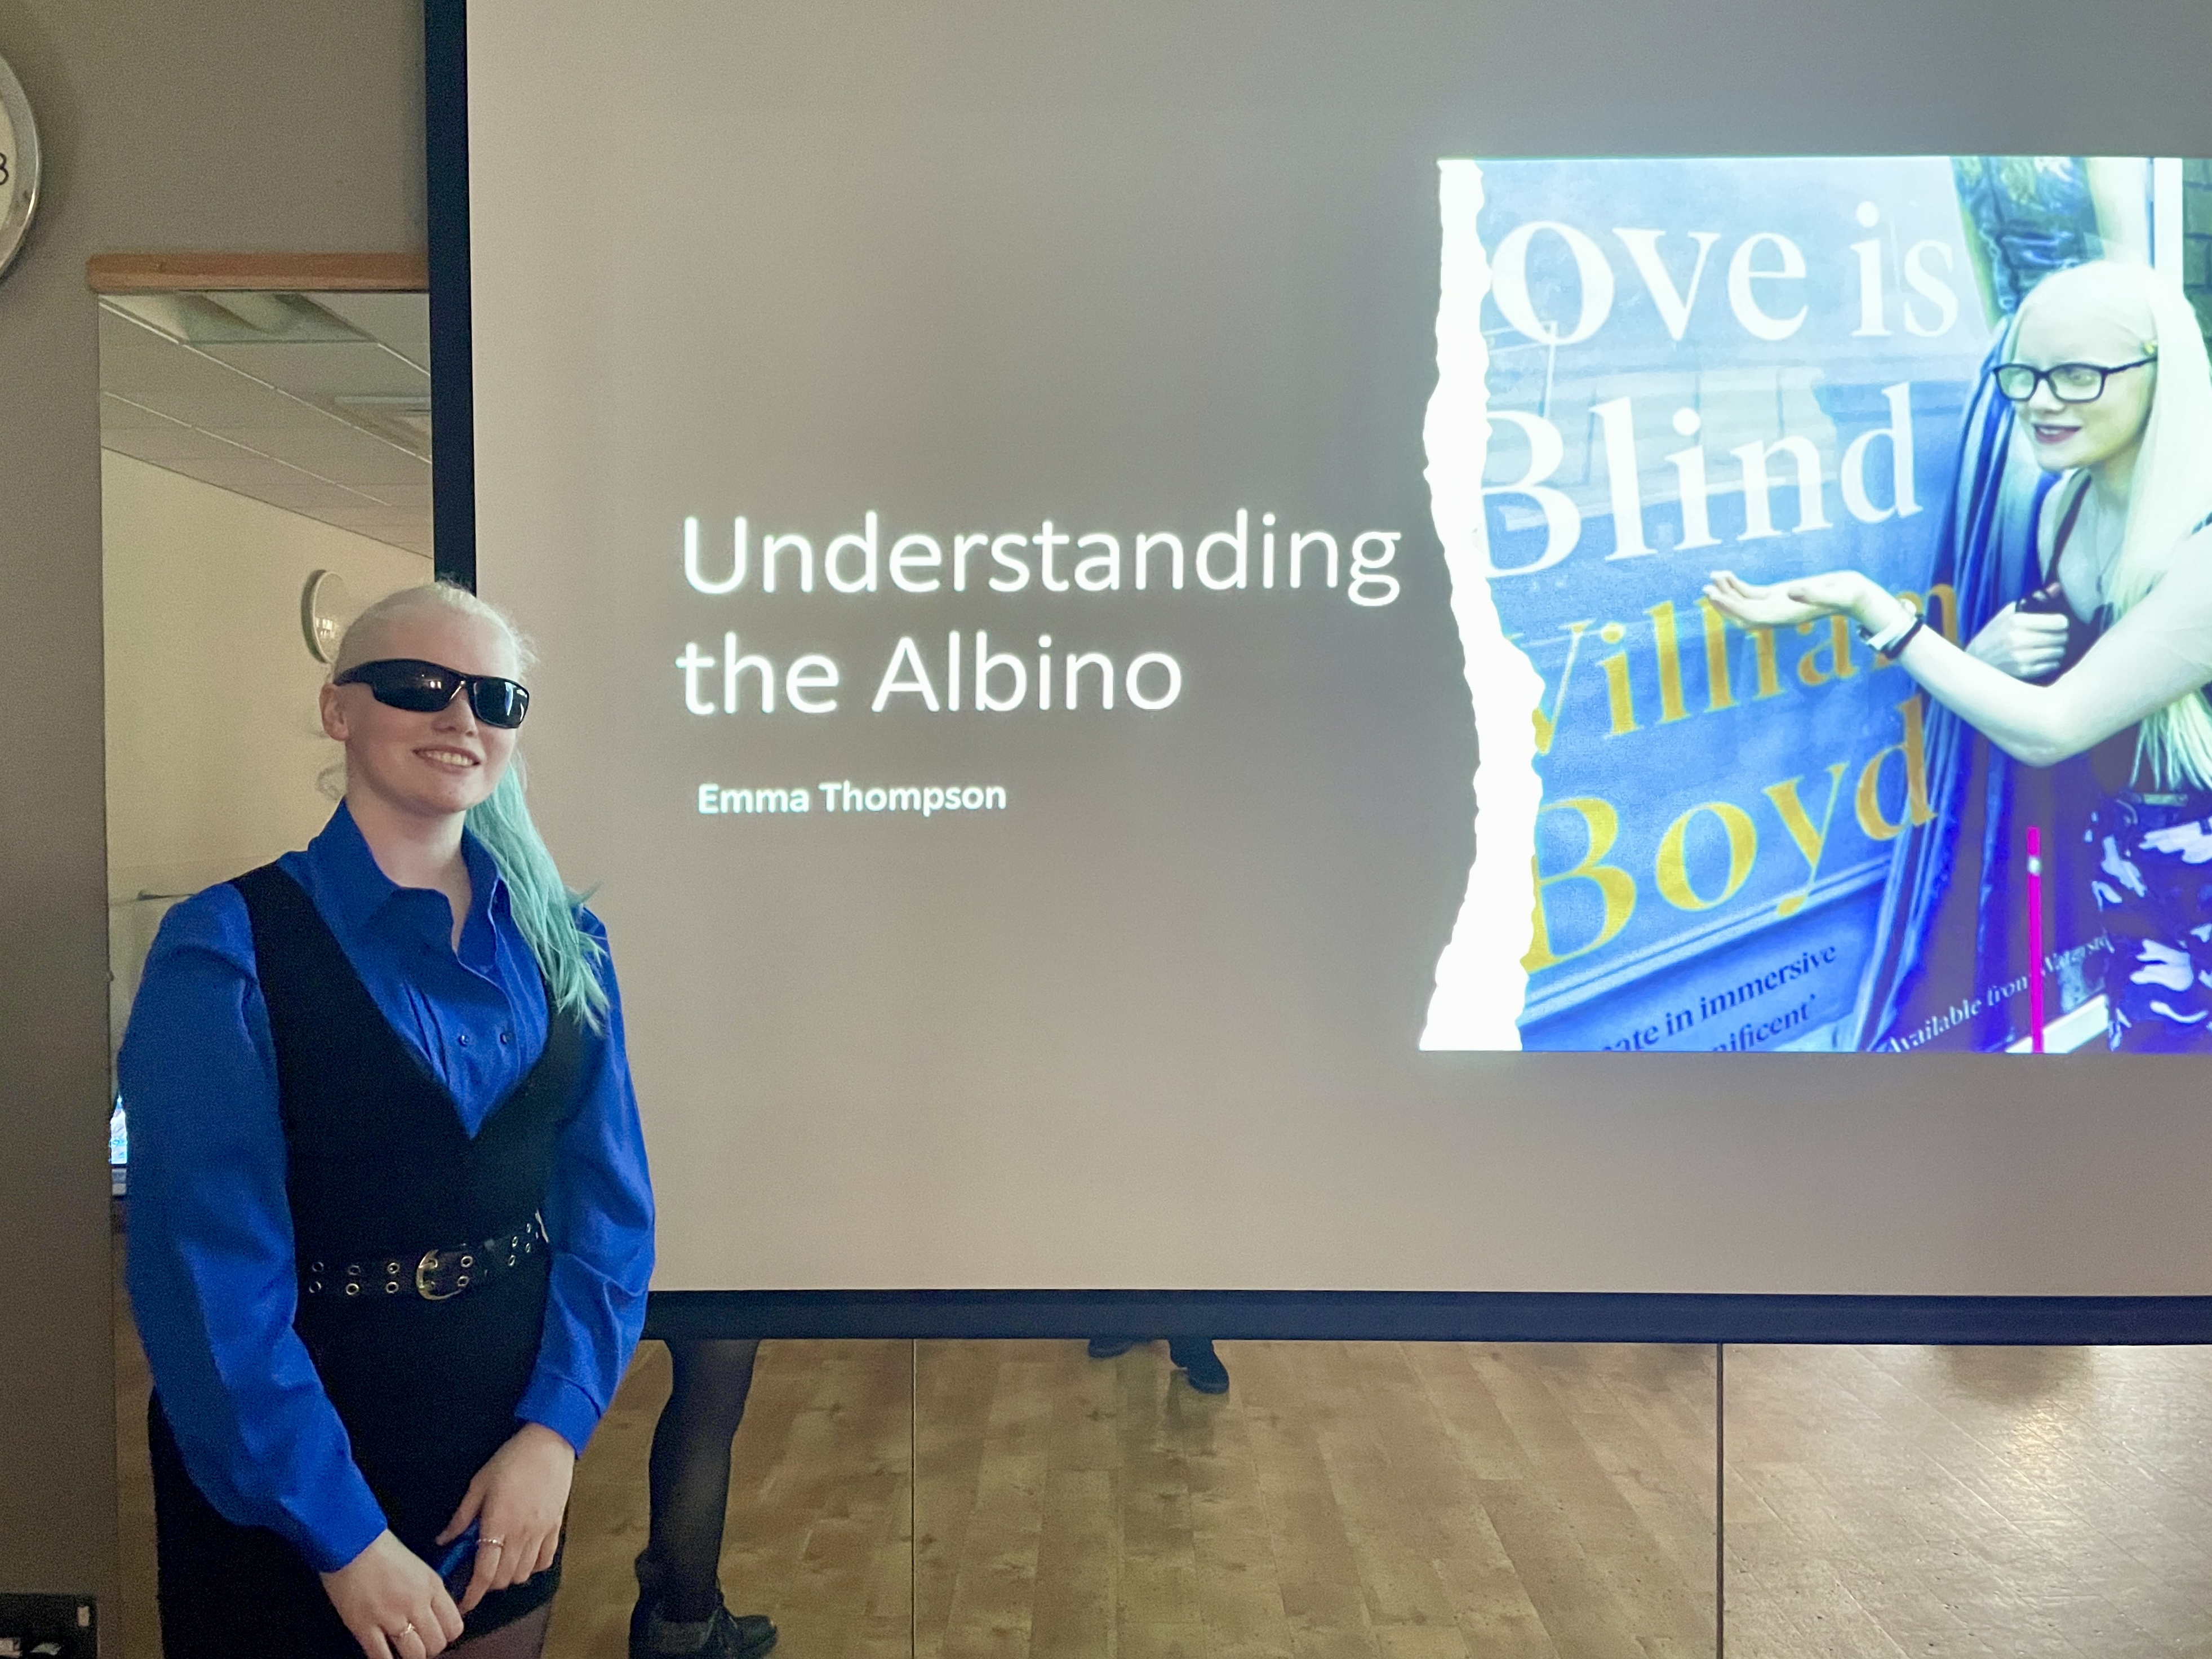 Emma stands in front of her presentation on a large screen - the slide reads: Understanding the Albino